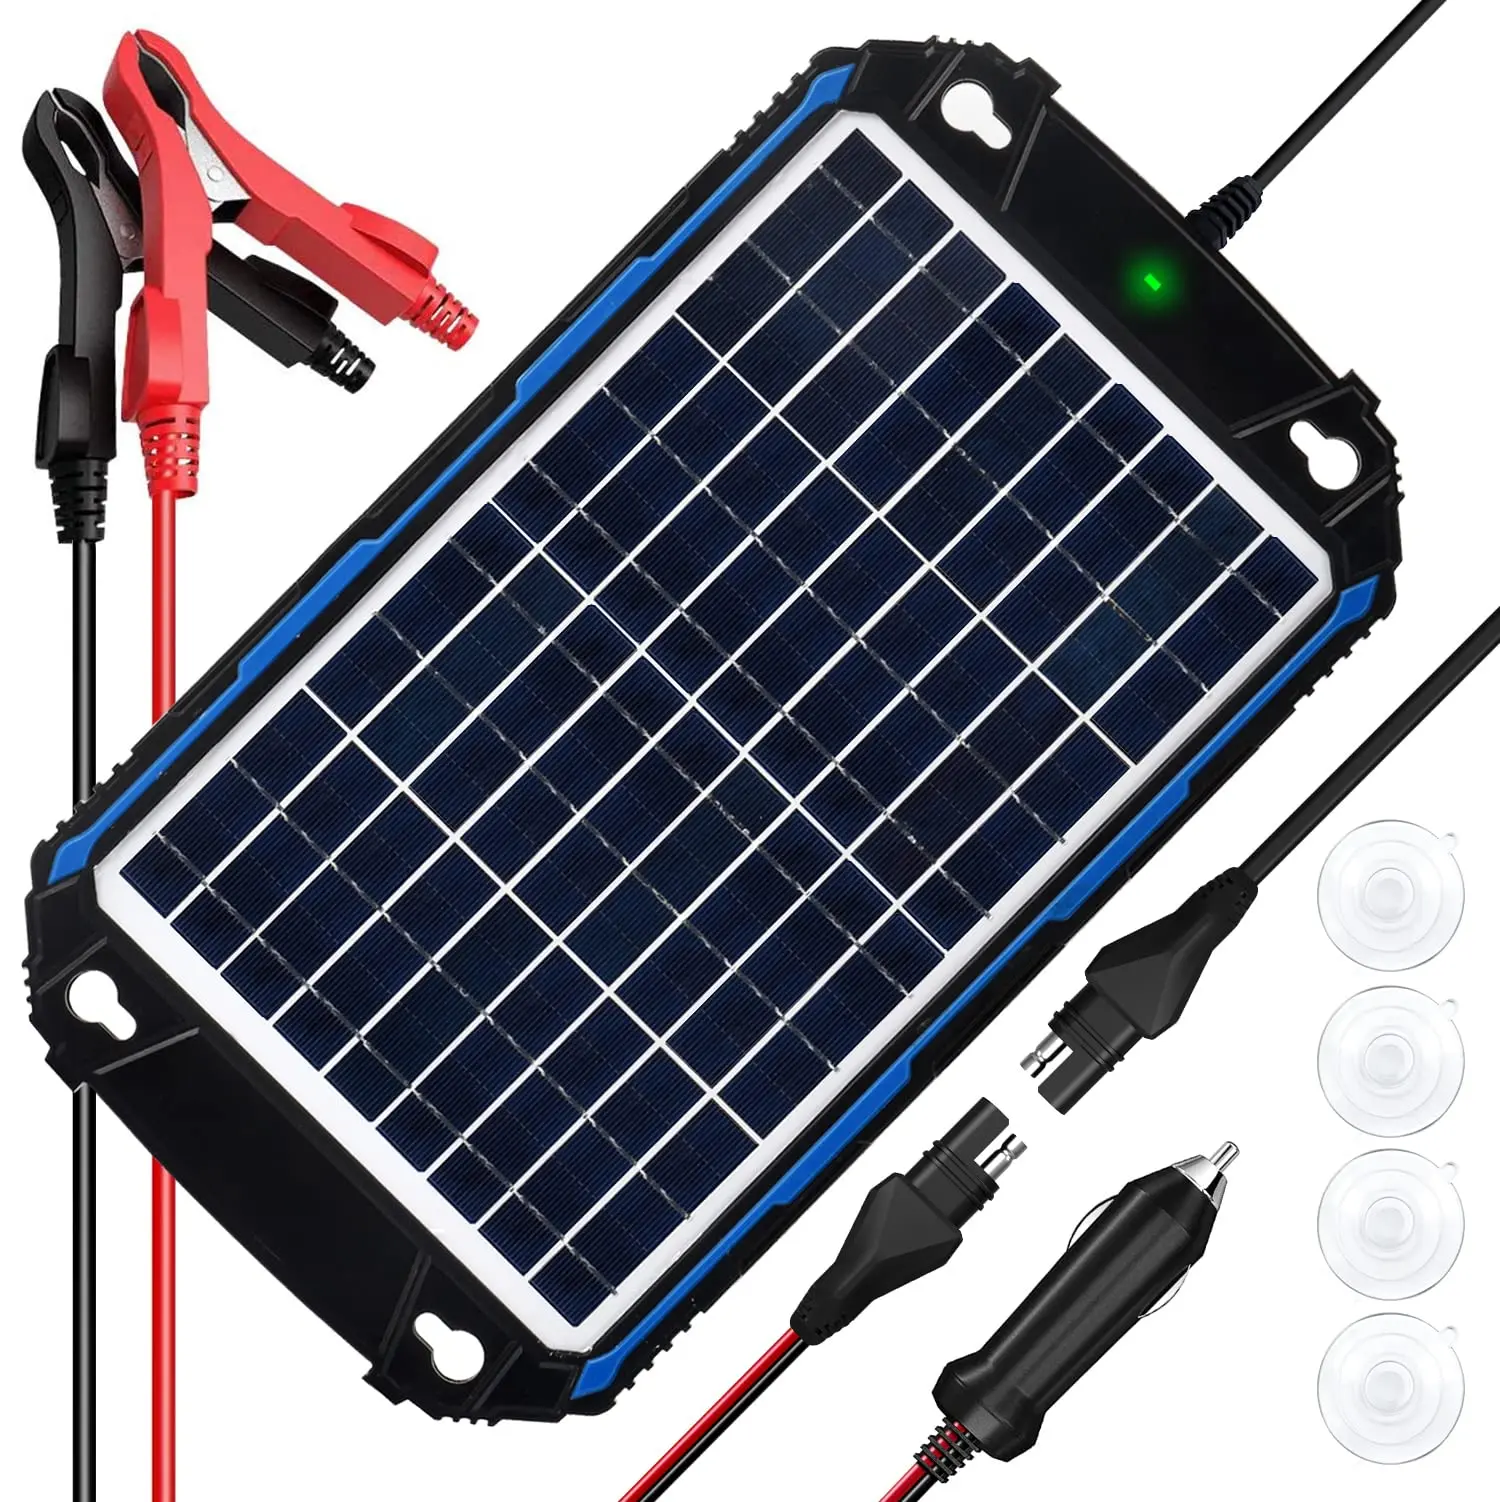 10 watt solar panel battery charger - Can a 10W solar panel charge a battery